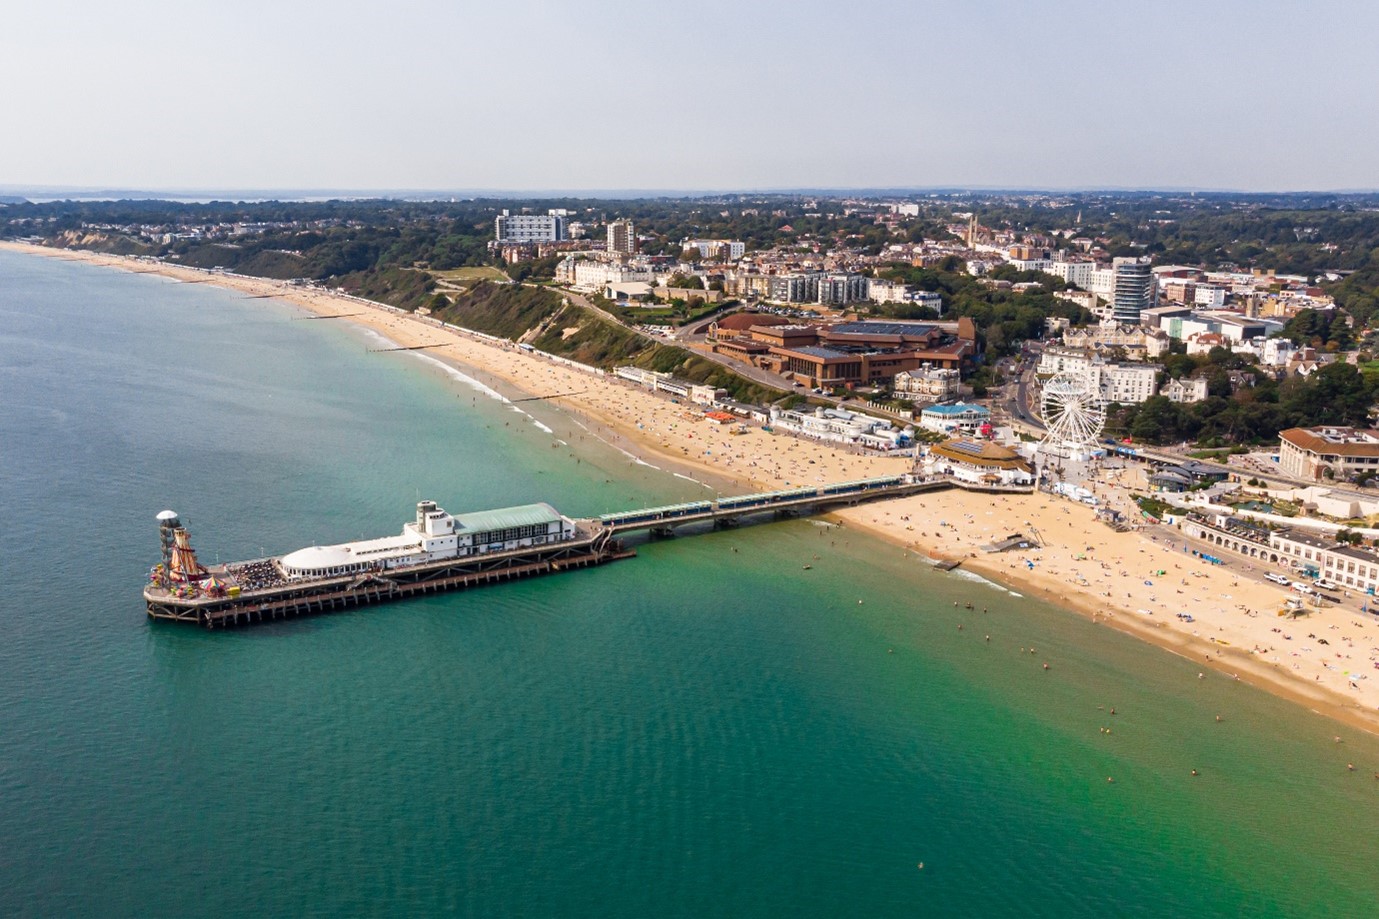 Bournemouth Pier surrounded by the sea from a drones point of view